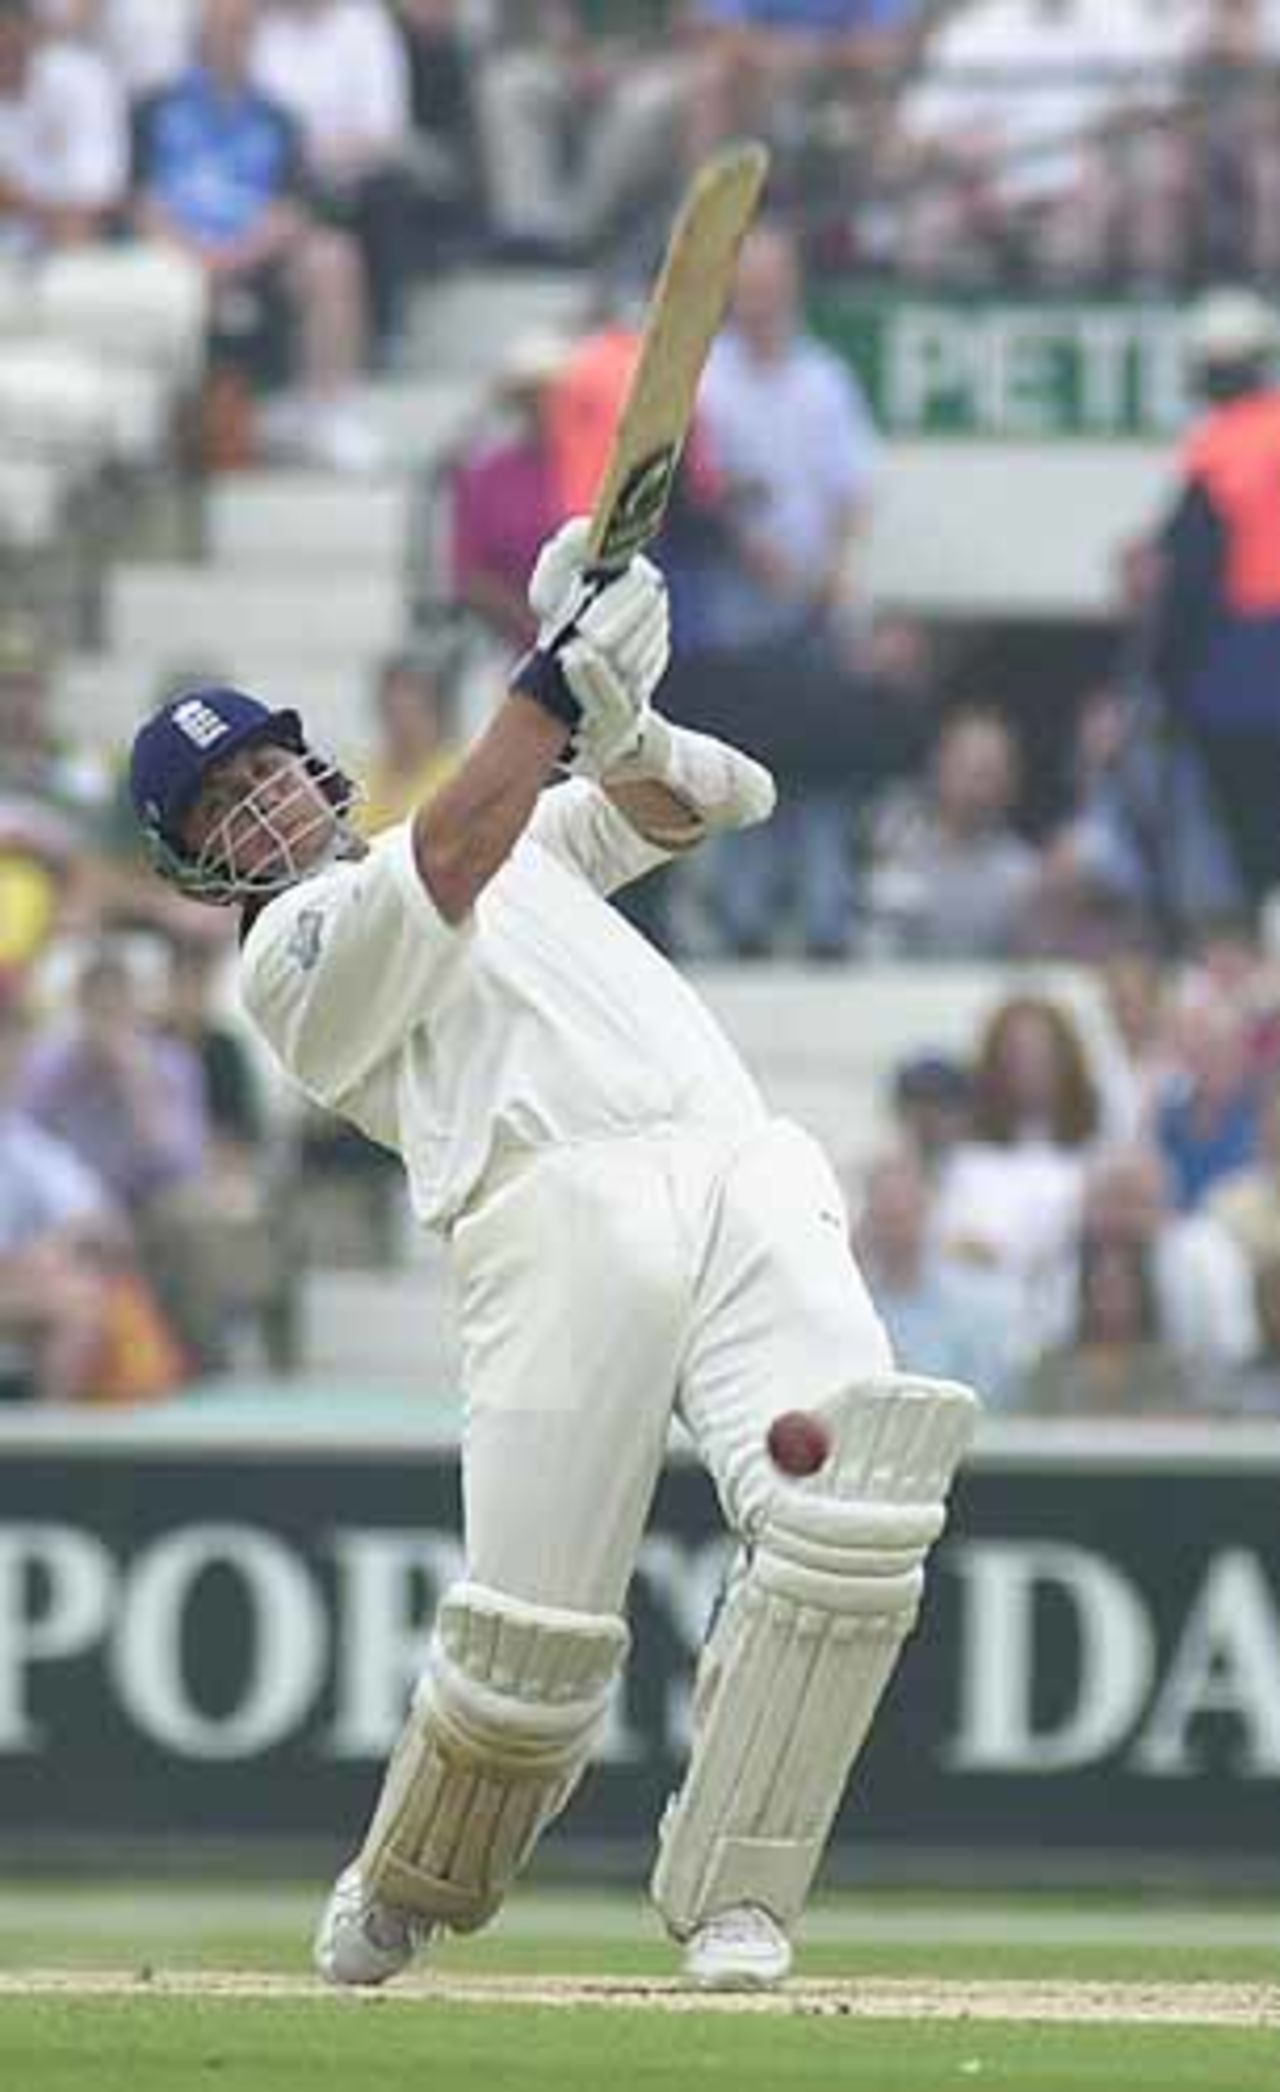 The Darren Gough heave; an Ashes study, fifth npower Test, Day 4, The Oval, 26 August 2001